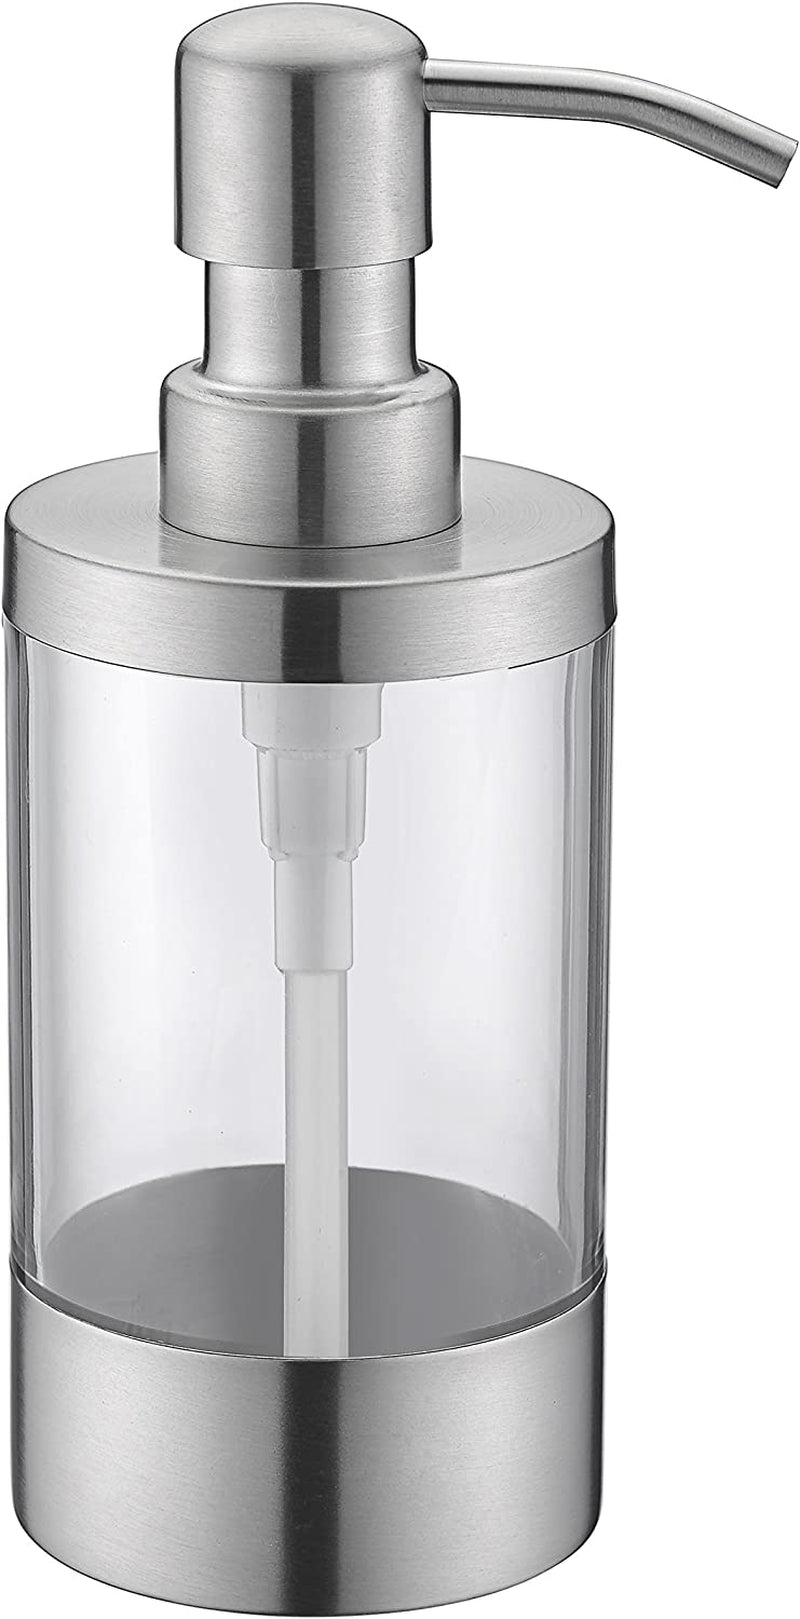 Brushed Nickel Countertop Soap Dispenser with Stainless Steel Pump - 250ml